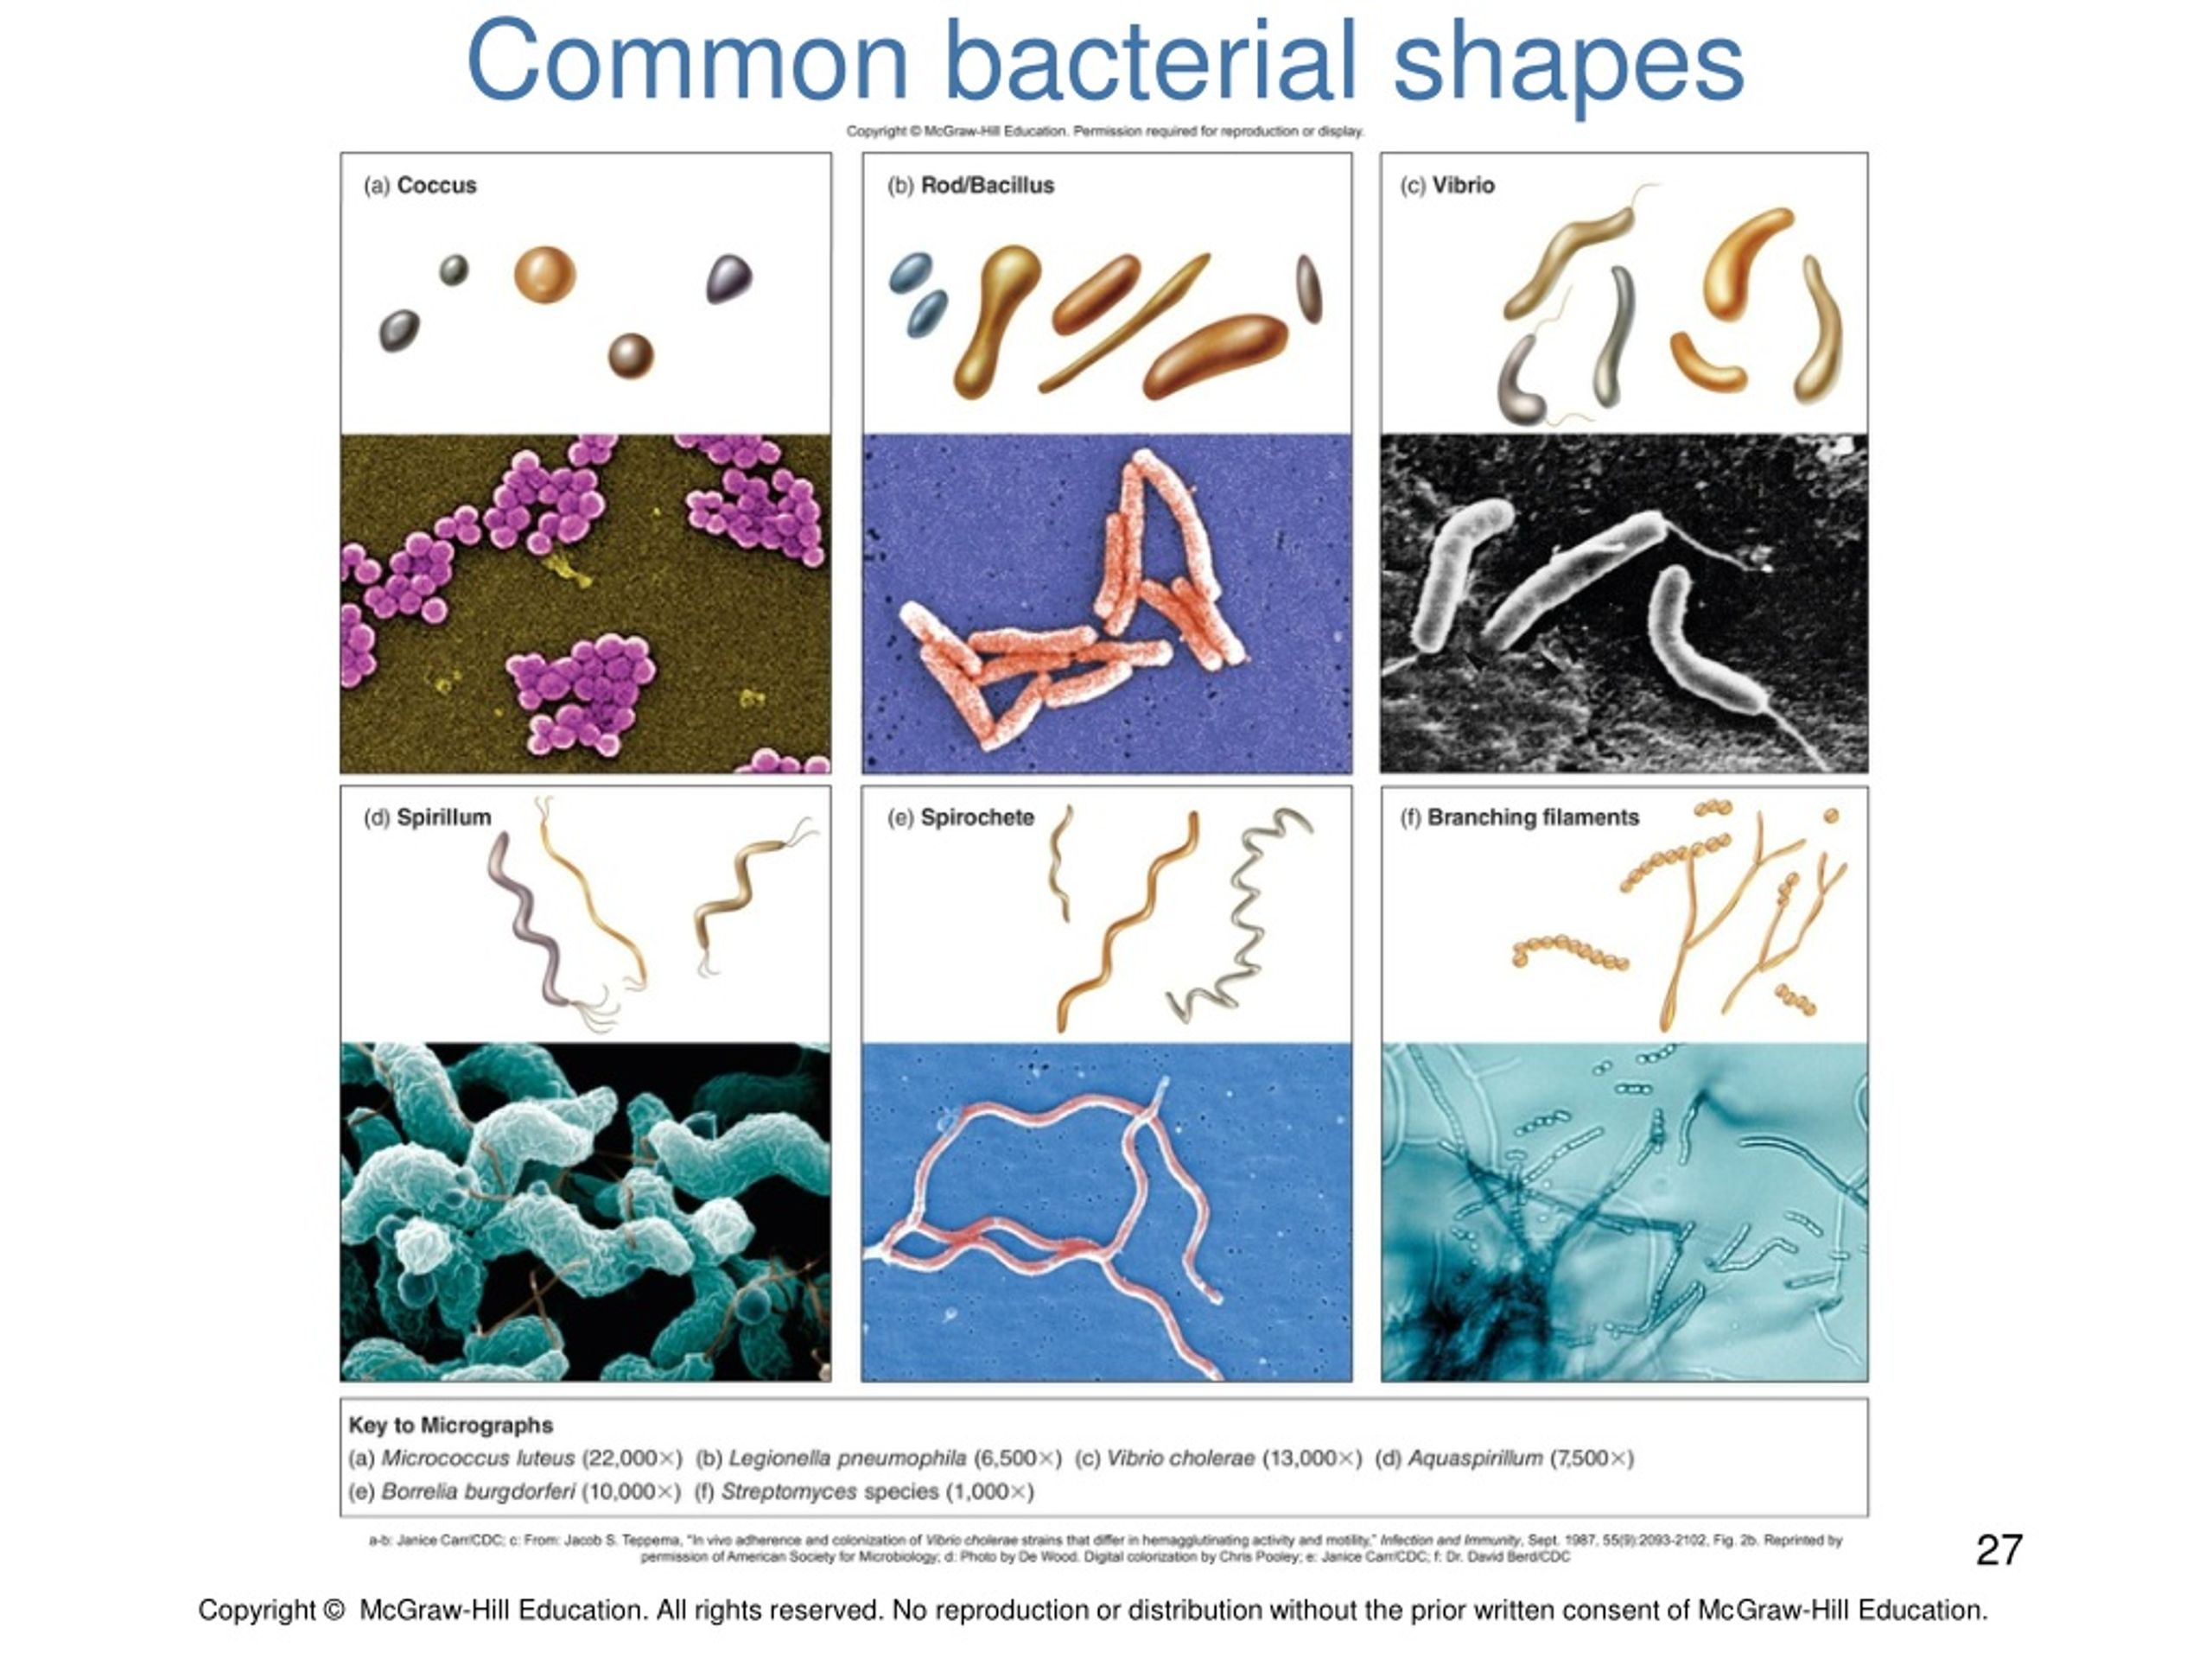 bacteria shapes and sizes